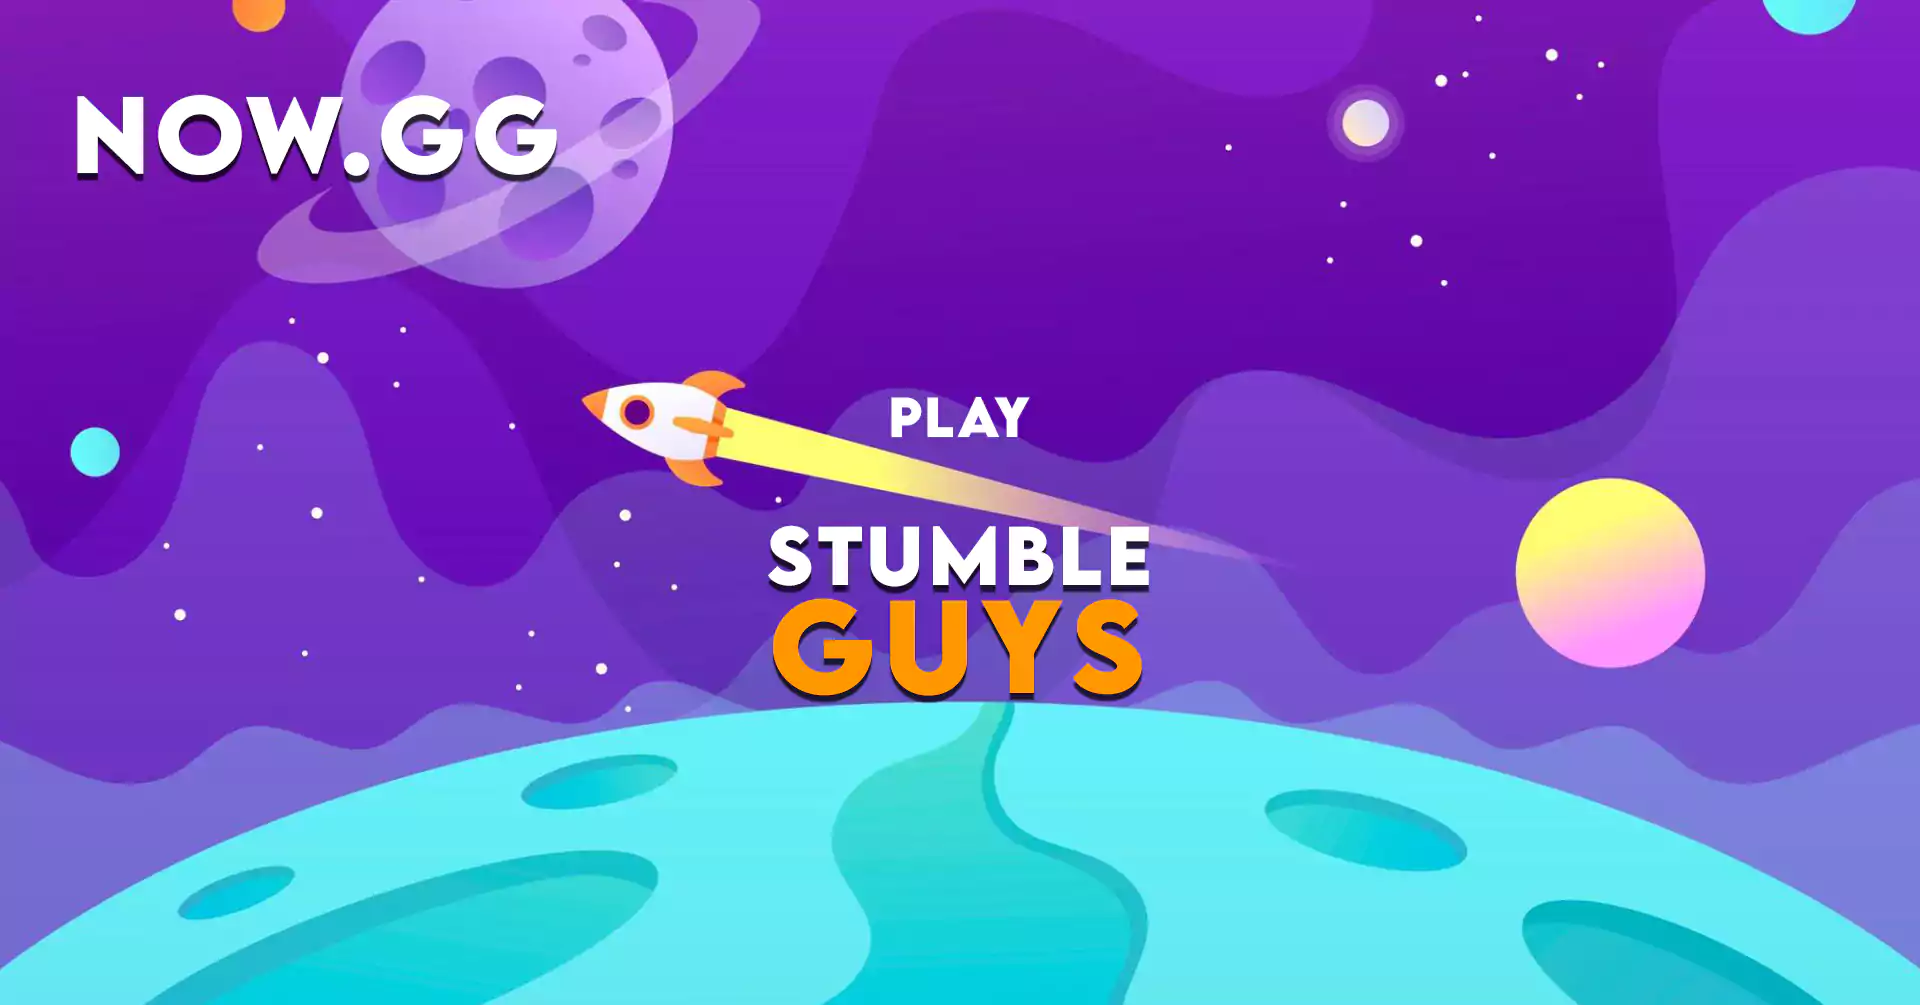 Now.gg Stumble Guys  Why is it so popular in the US?